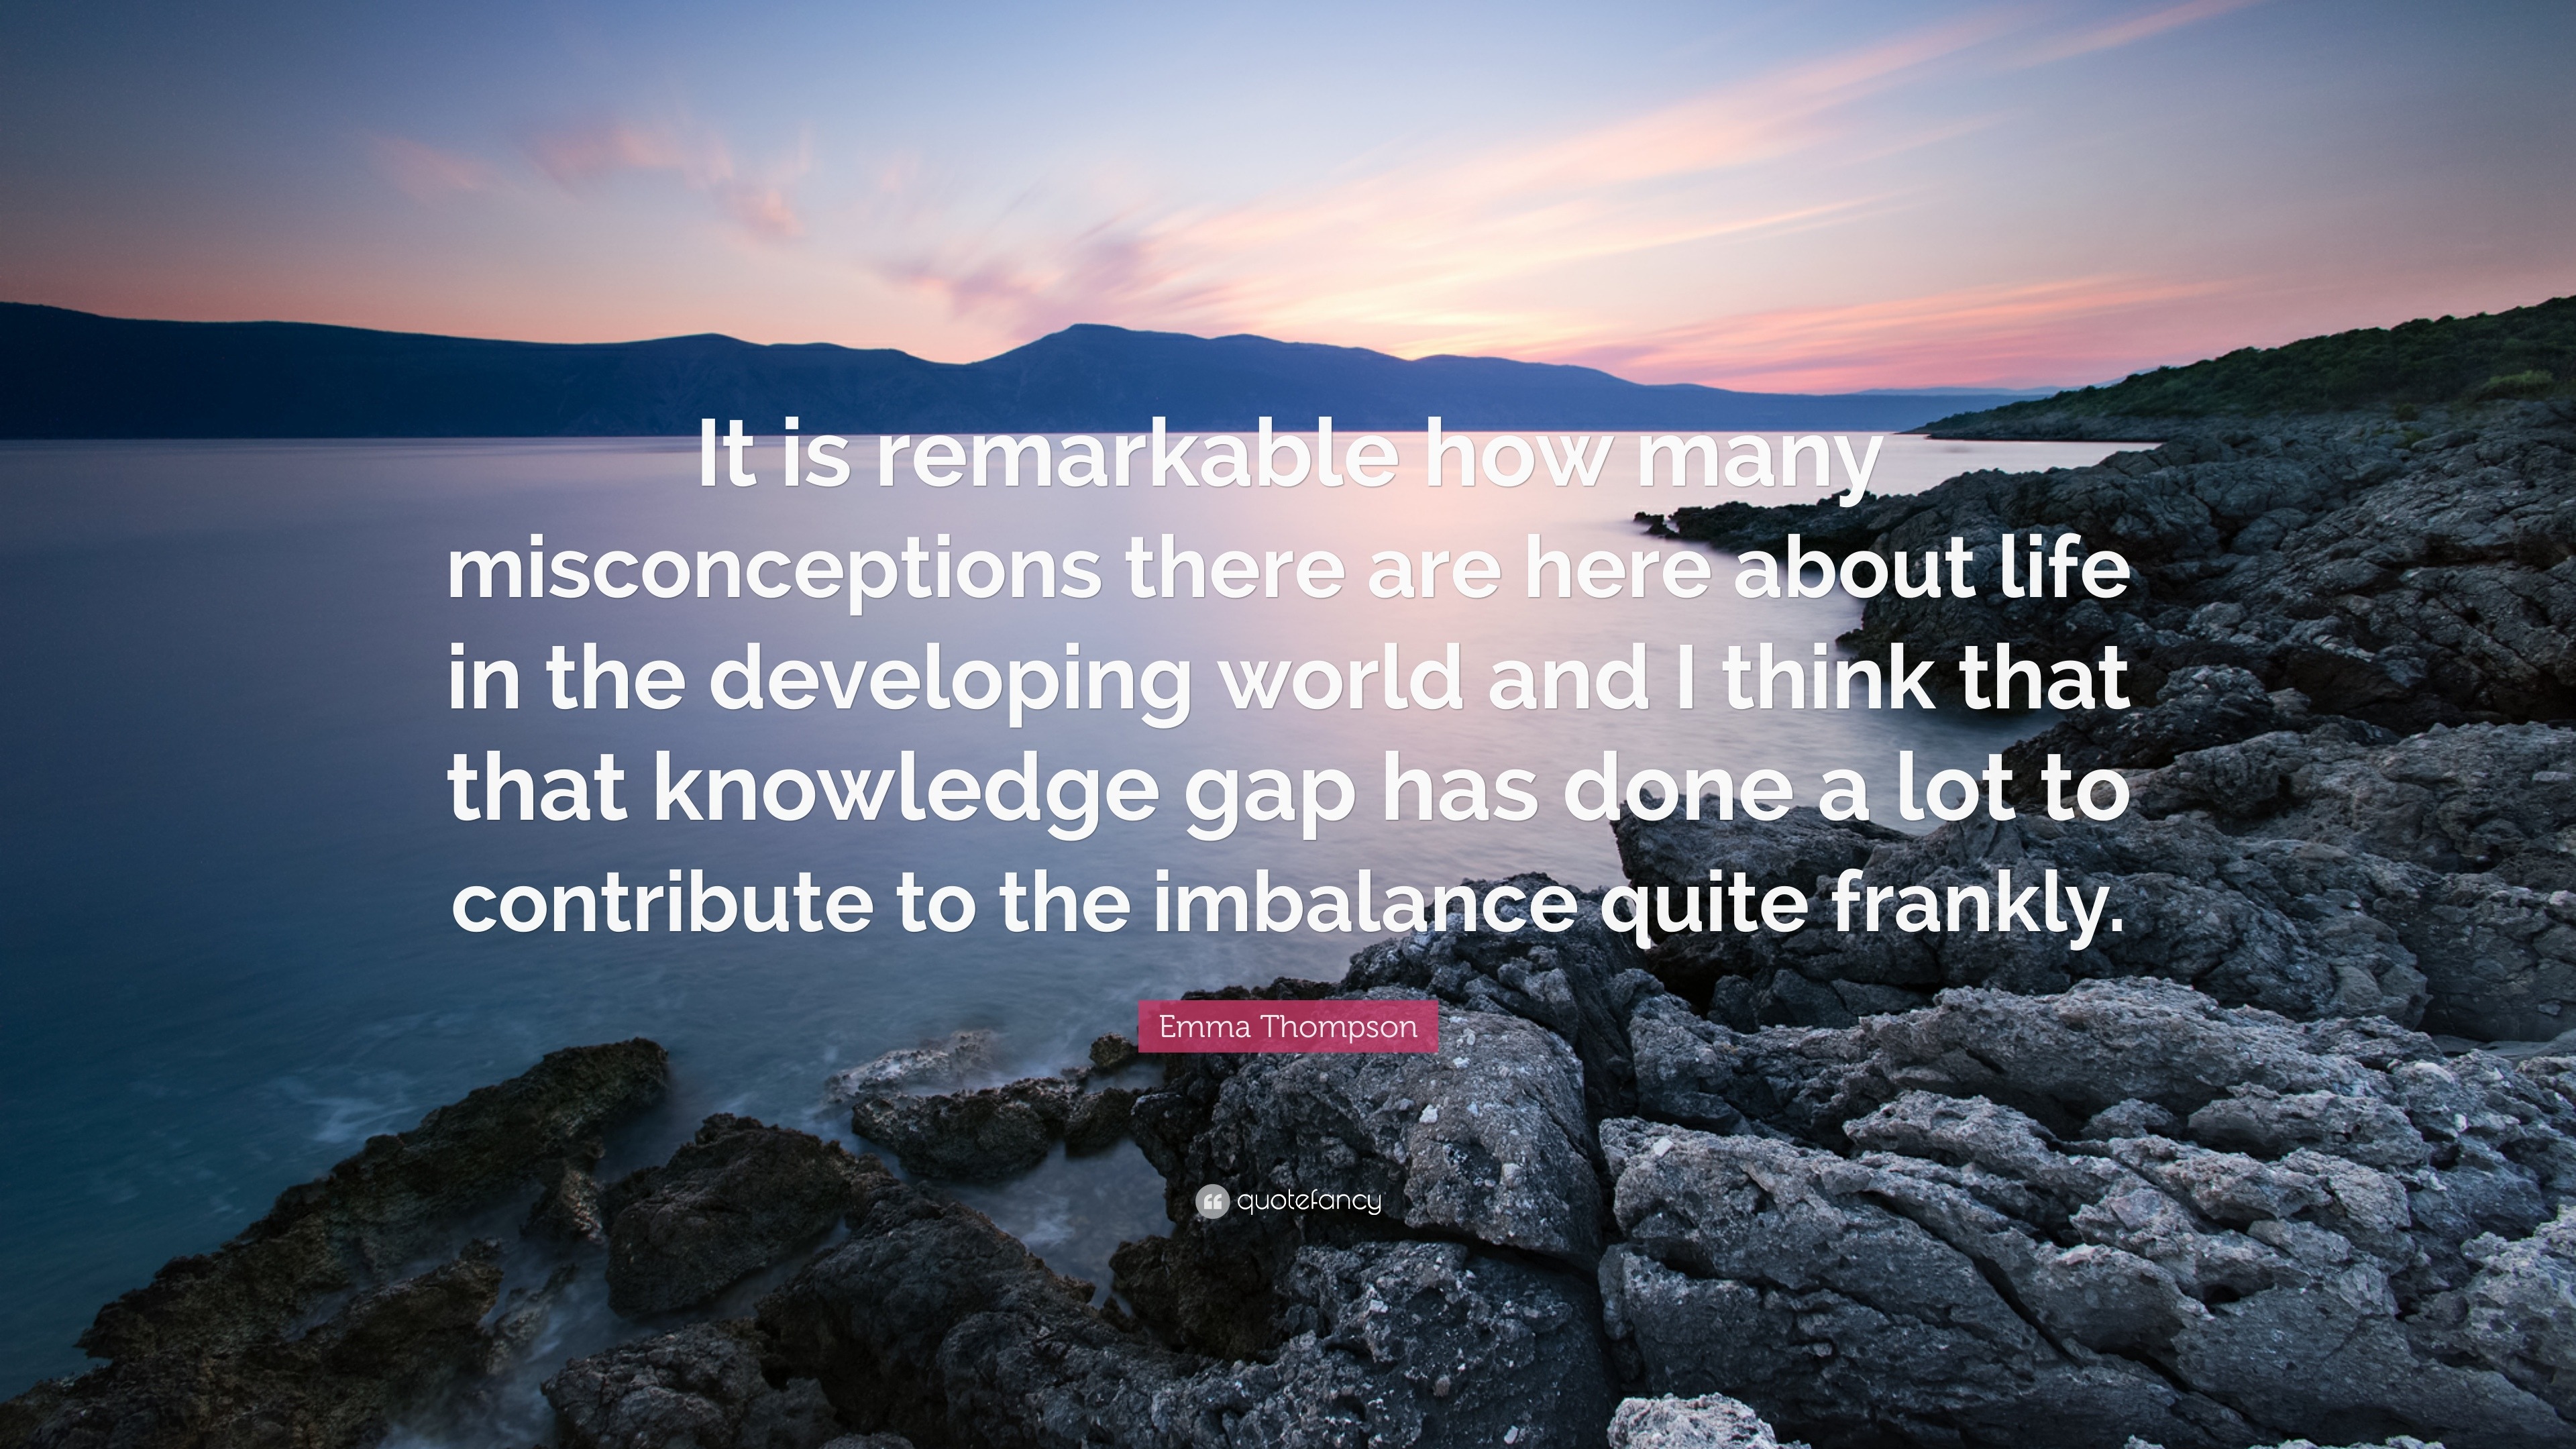 Emma Thompson Quote: "It is remarkable how many ...